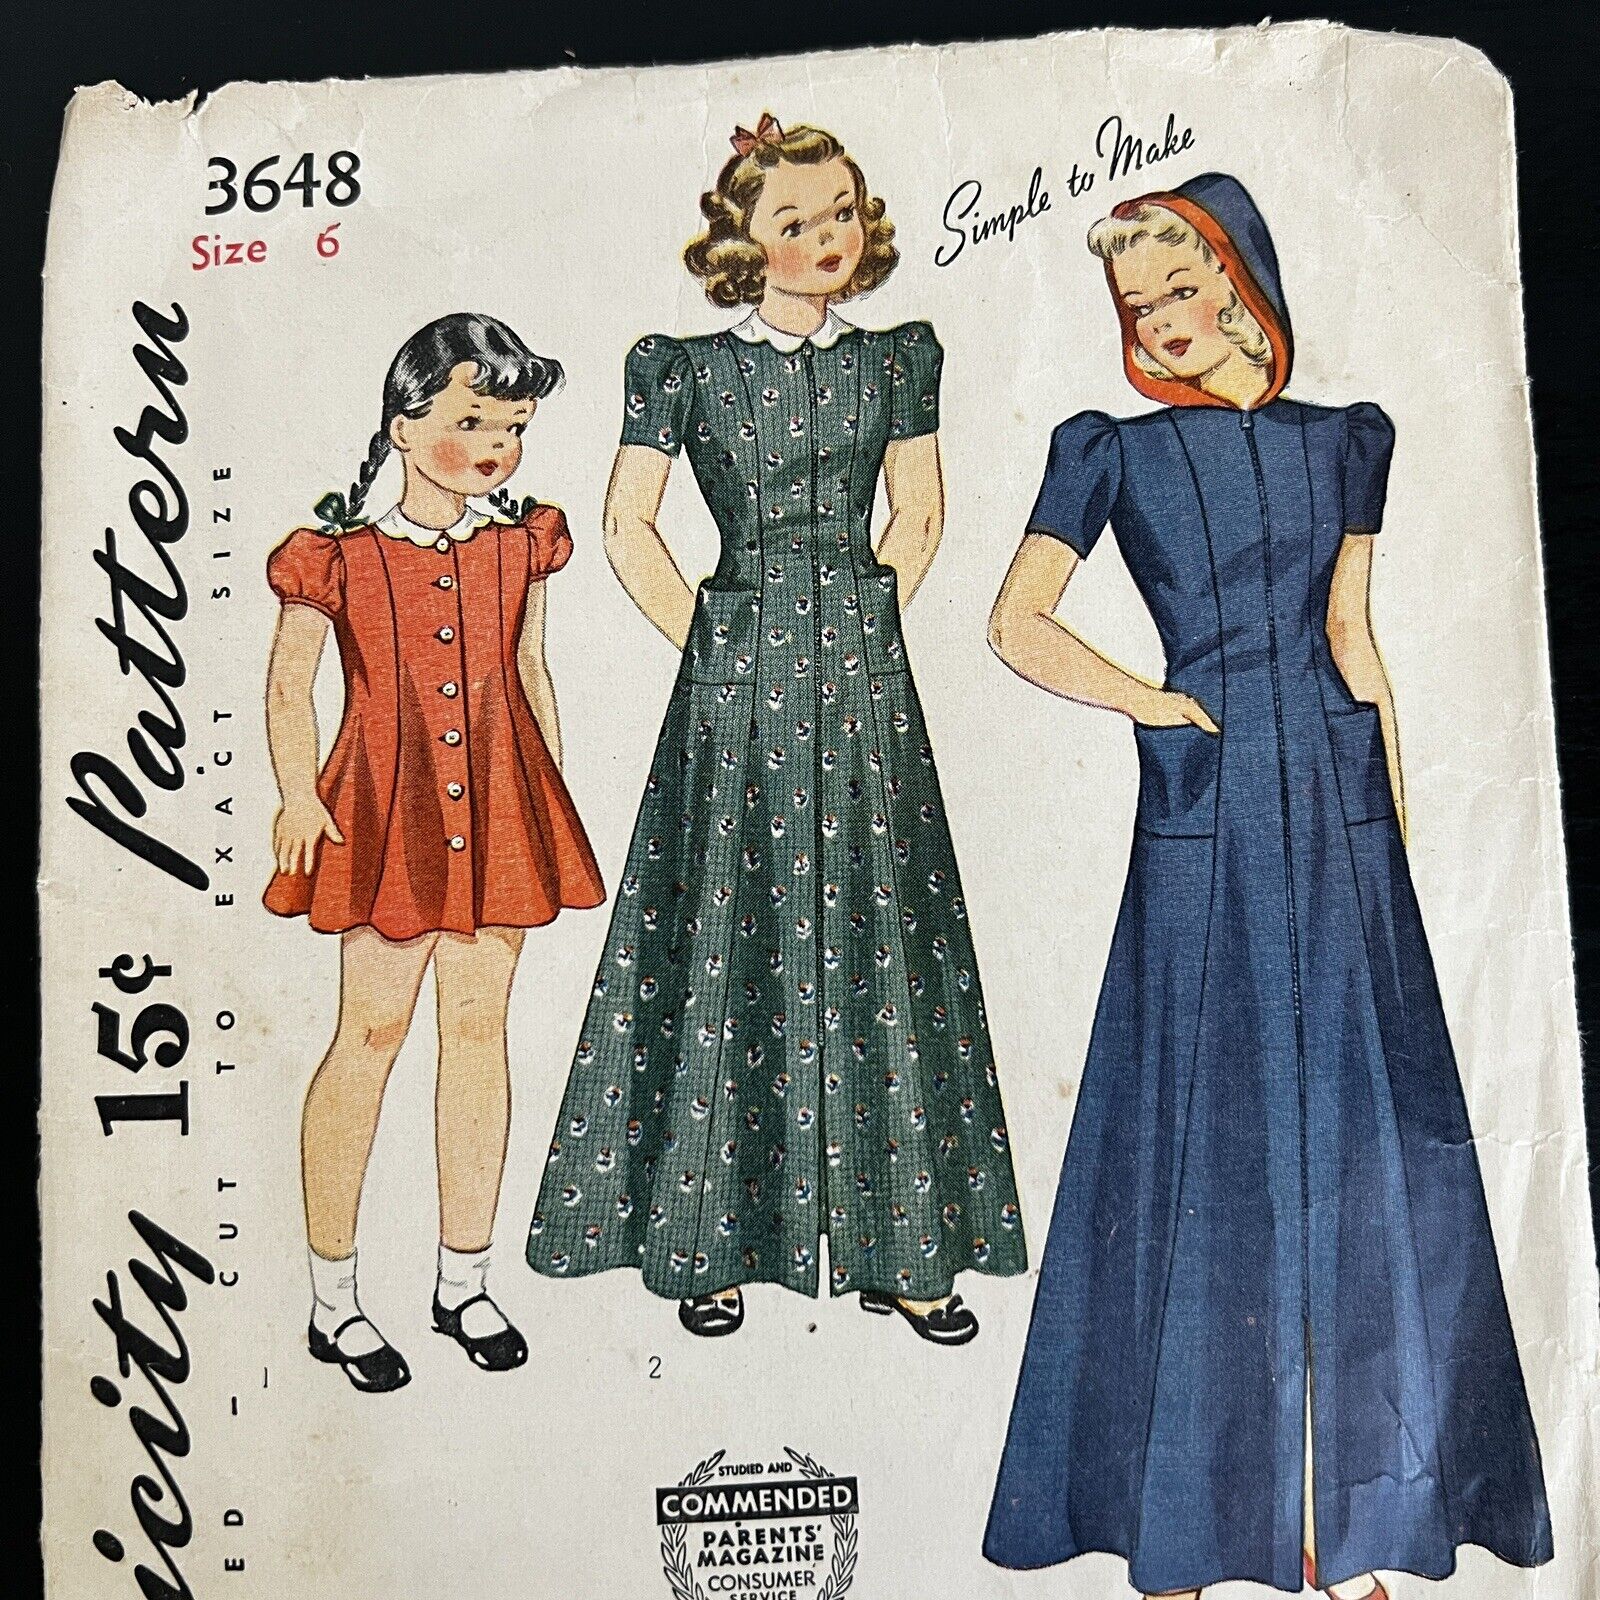 Vintage 1940s Simplicity 3648 Girls Seamed Dress Housecoat Sewing Pattern 6 CUT